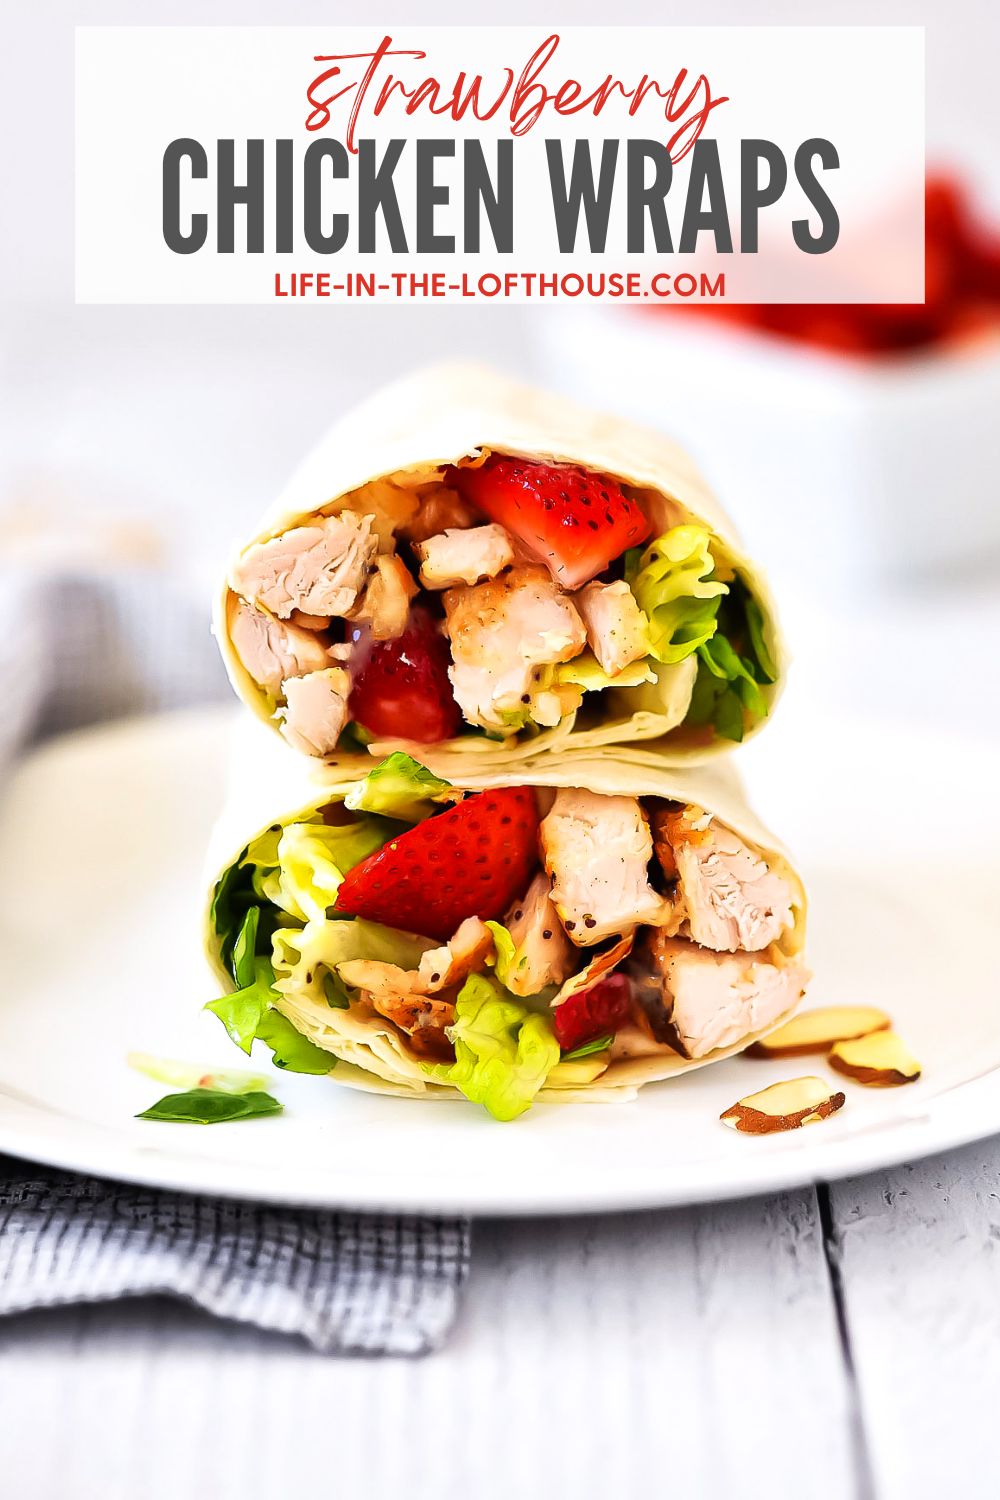 Chicken wraps with strawberries